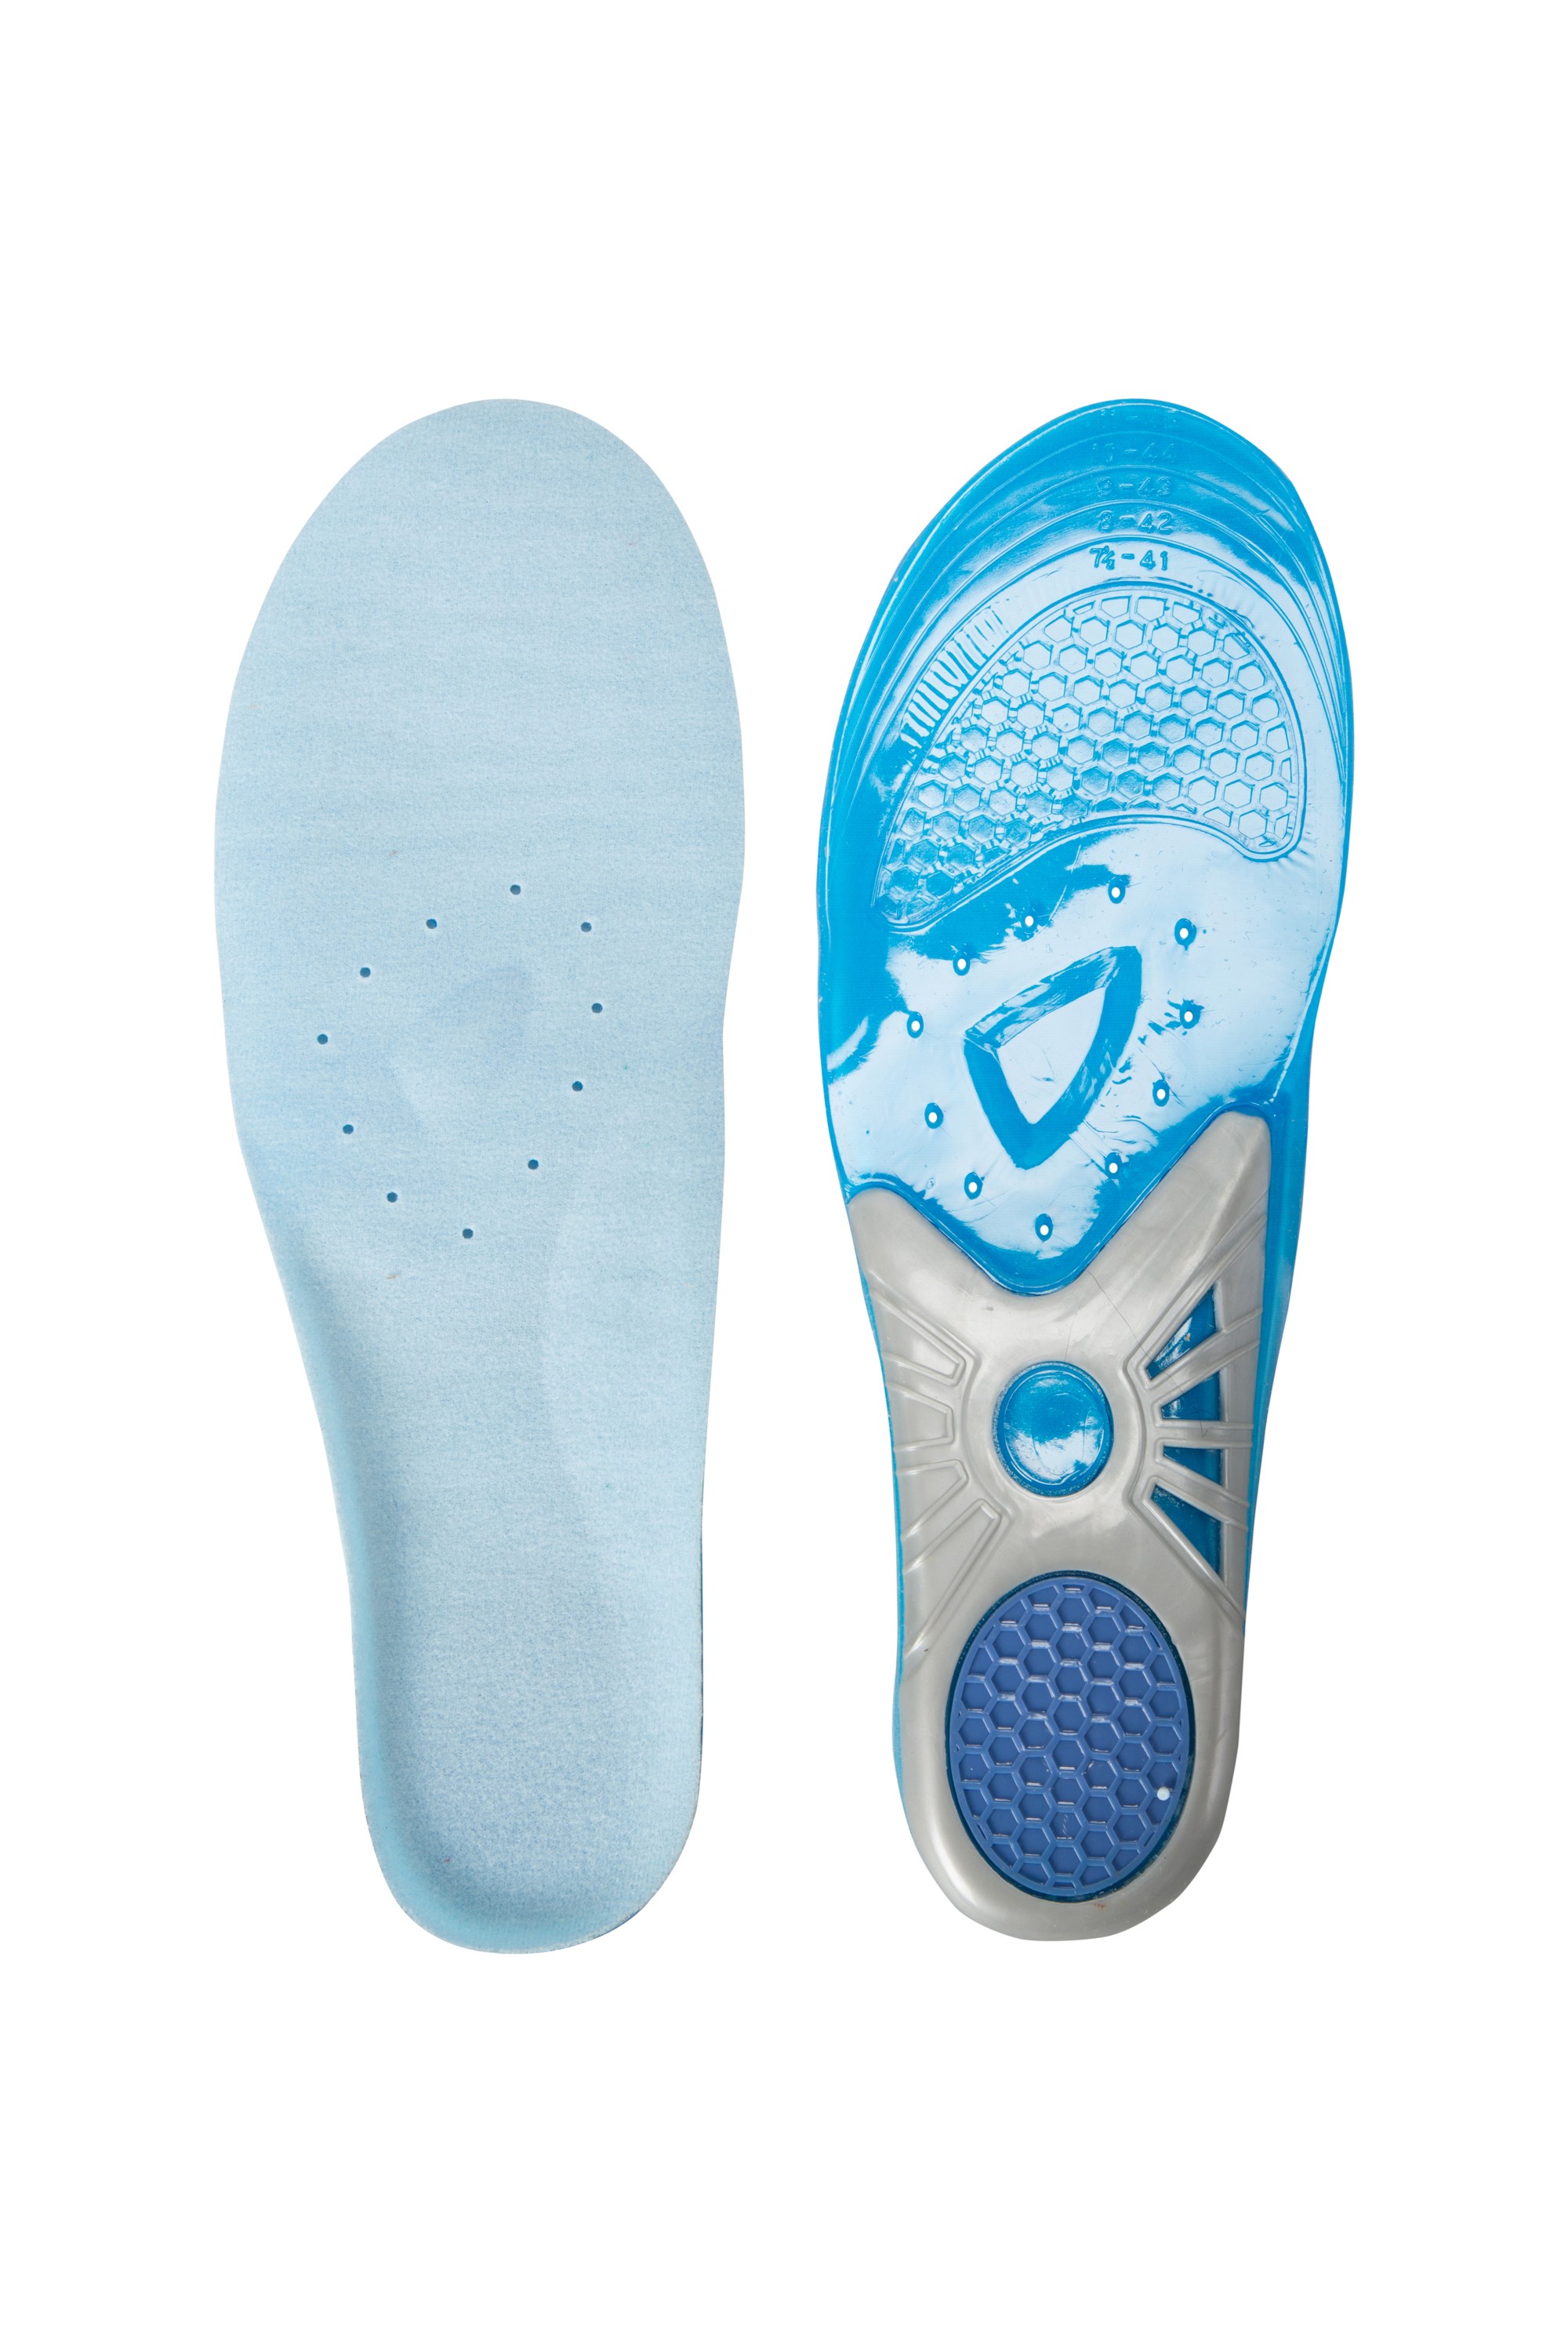 Soft Felt Layer for Sports Moulded & Cushioned Running Shock Absorbent Gel Insoles Hiking Mountain Warehouse IsoGel Womens Insole Antibacterial Shoe Inserts 